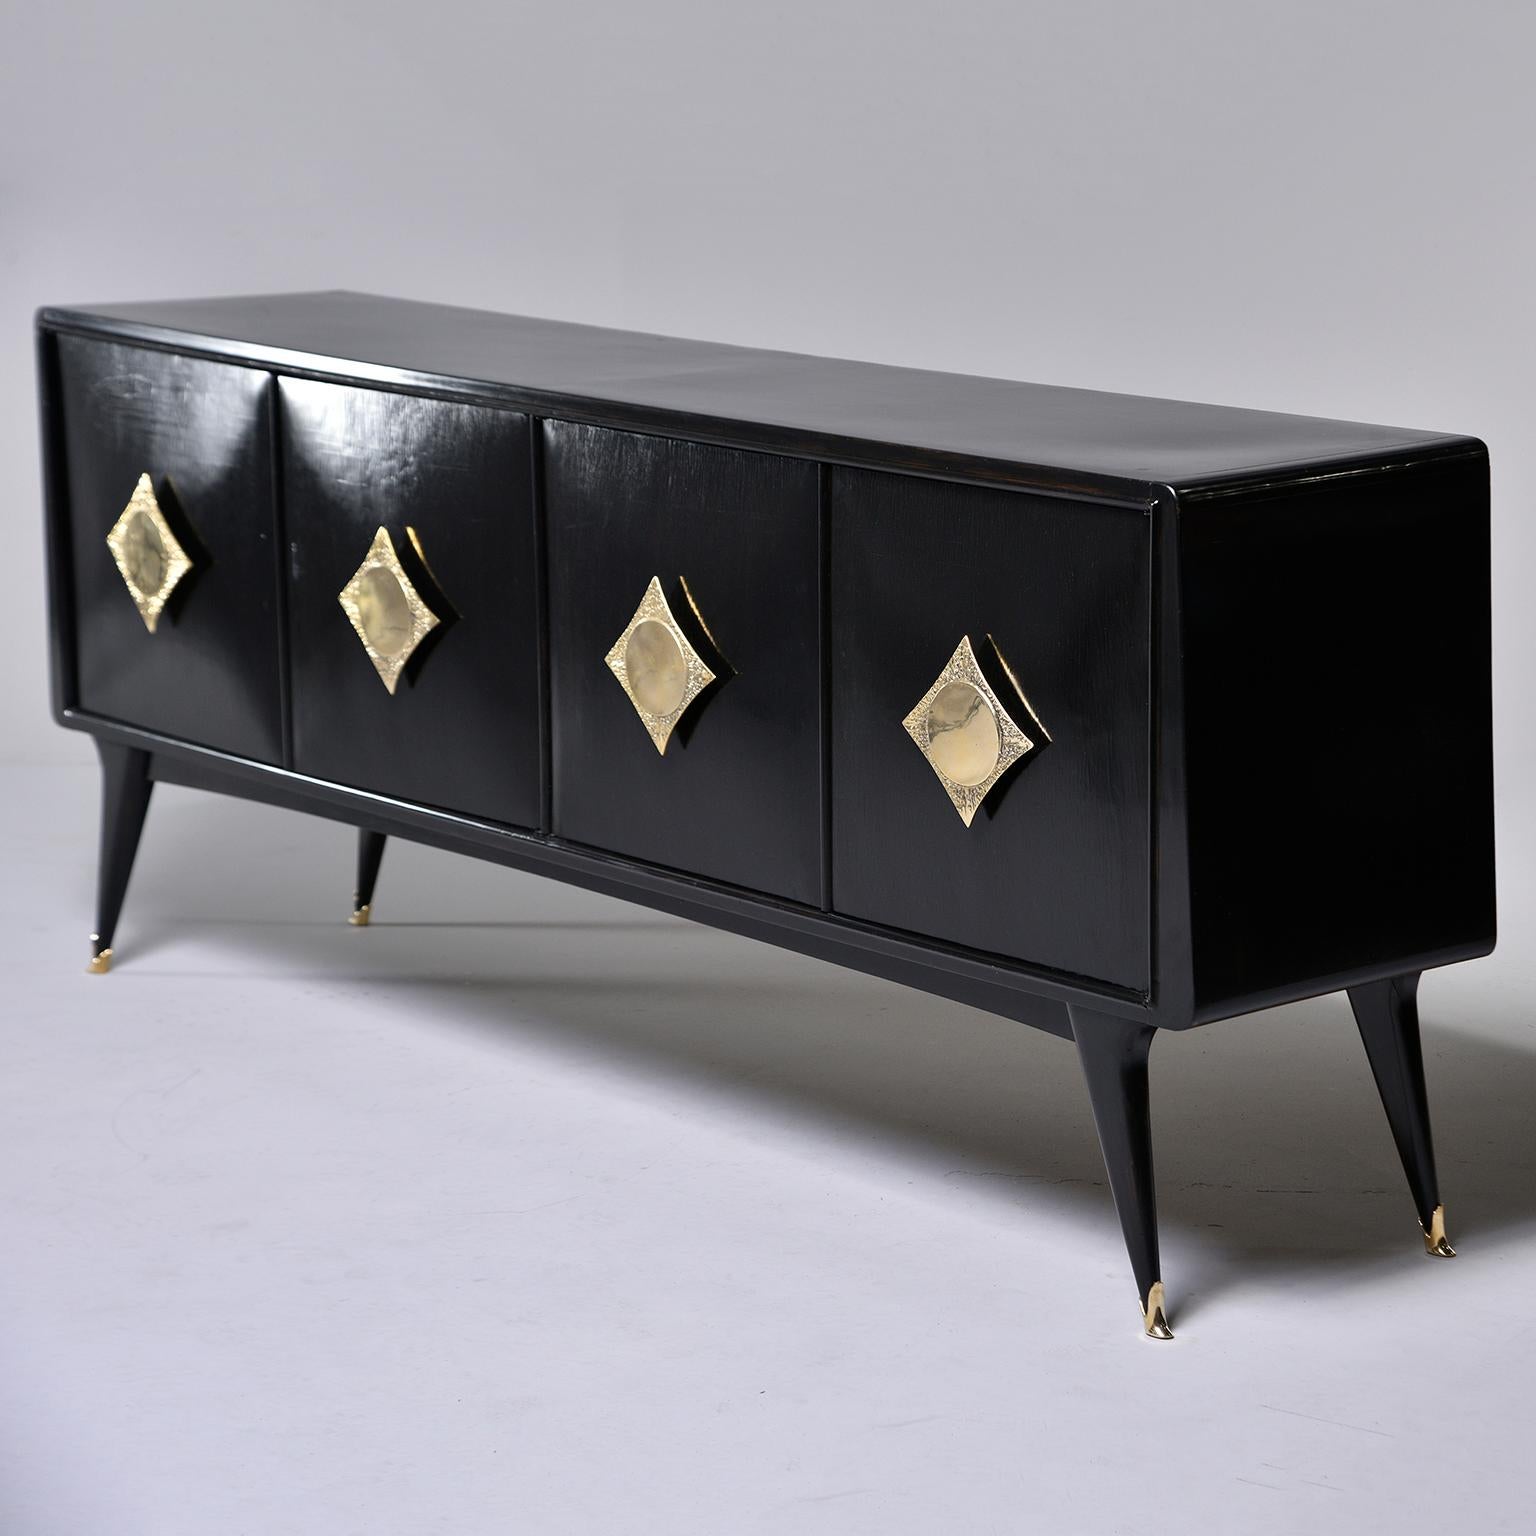 Circa 1950s Italian sideboard has an ebonised finish, angled tapered legs with brass sabots, two storage compartments with internal shelf and four hinged doors with oversized decorative brass knobs. Unknown maker.